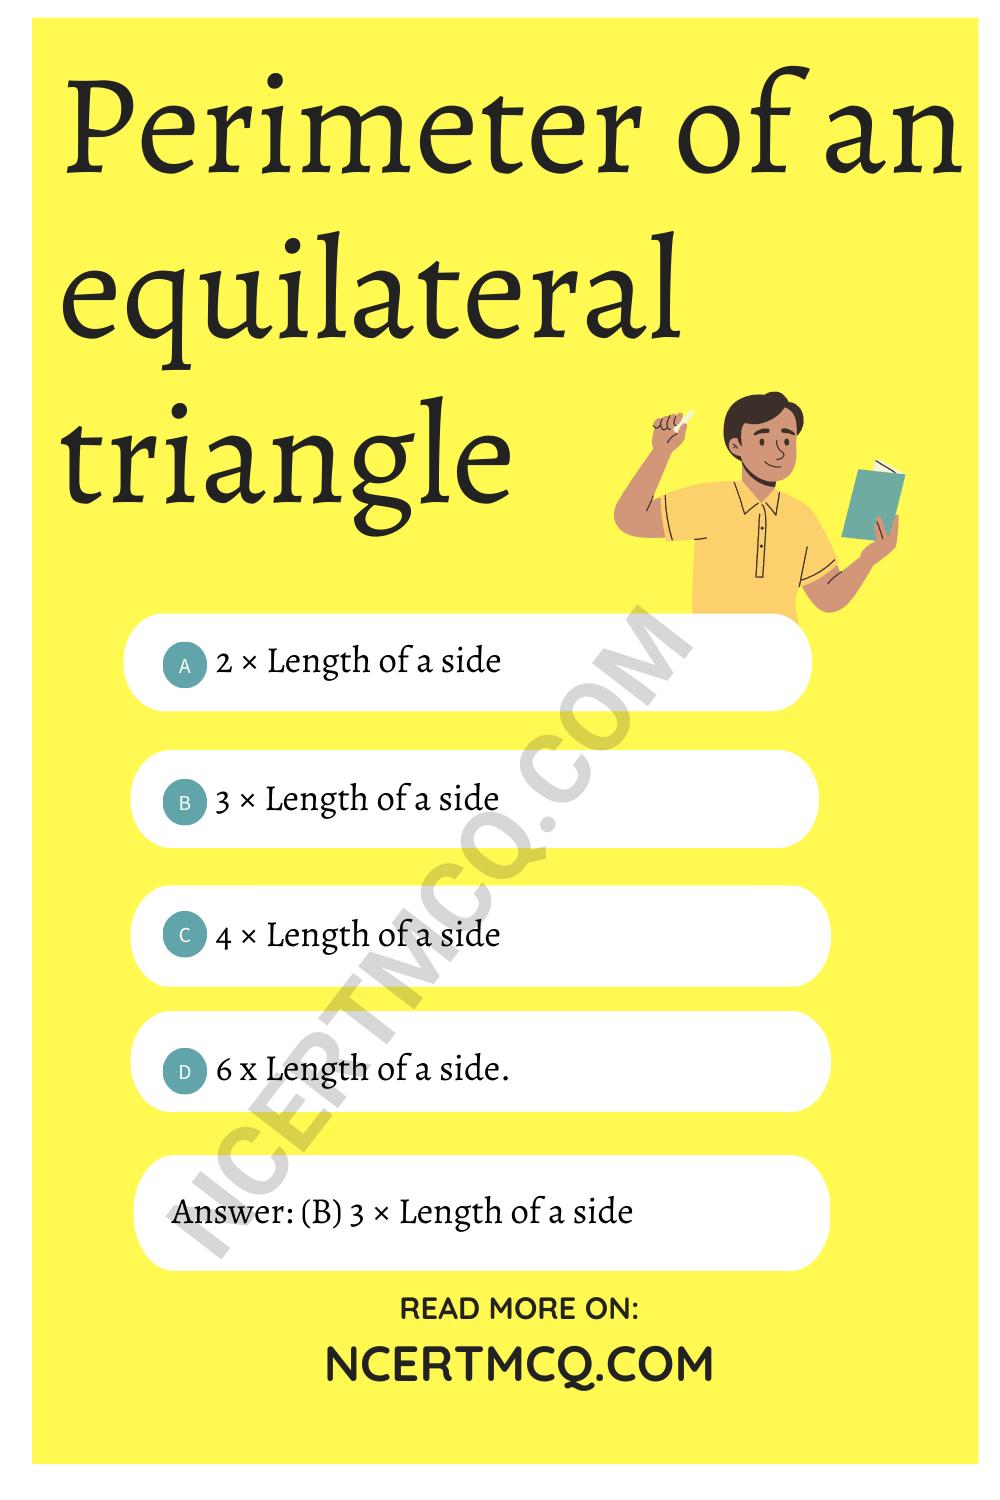 Perimeter of an equilateral triangle